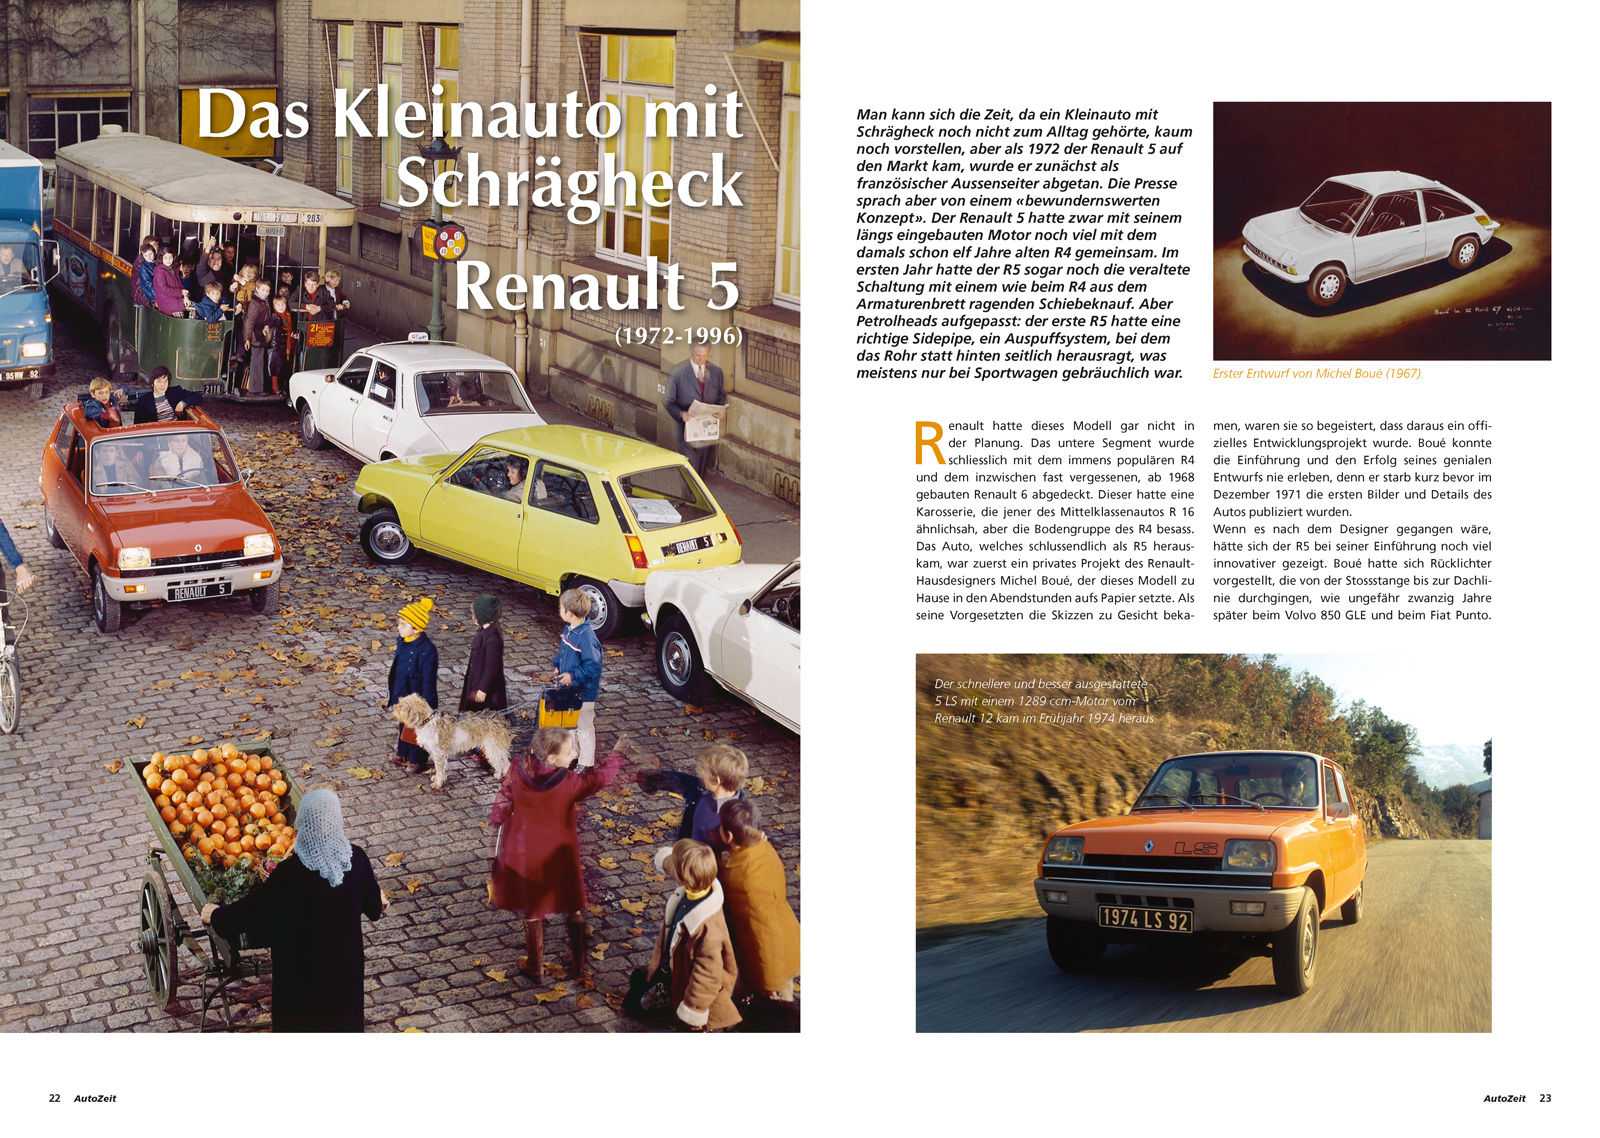 Coverstory: Renault 5 (1972-1996)